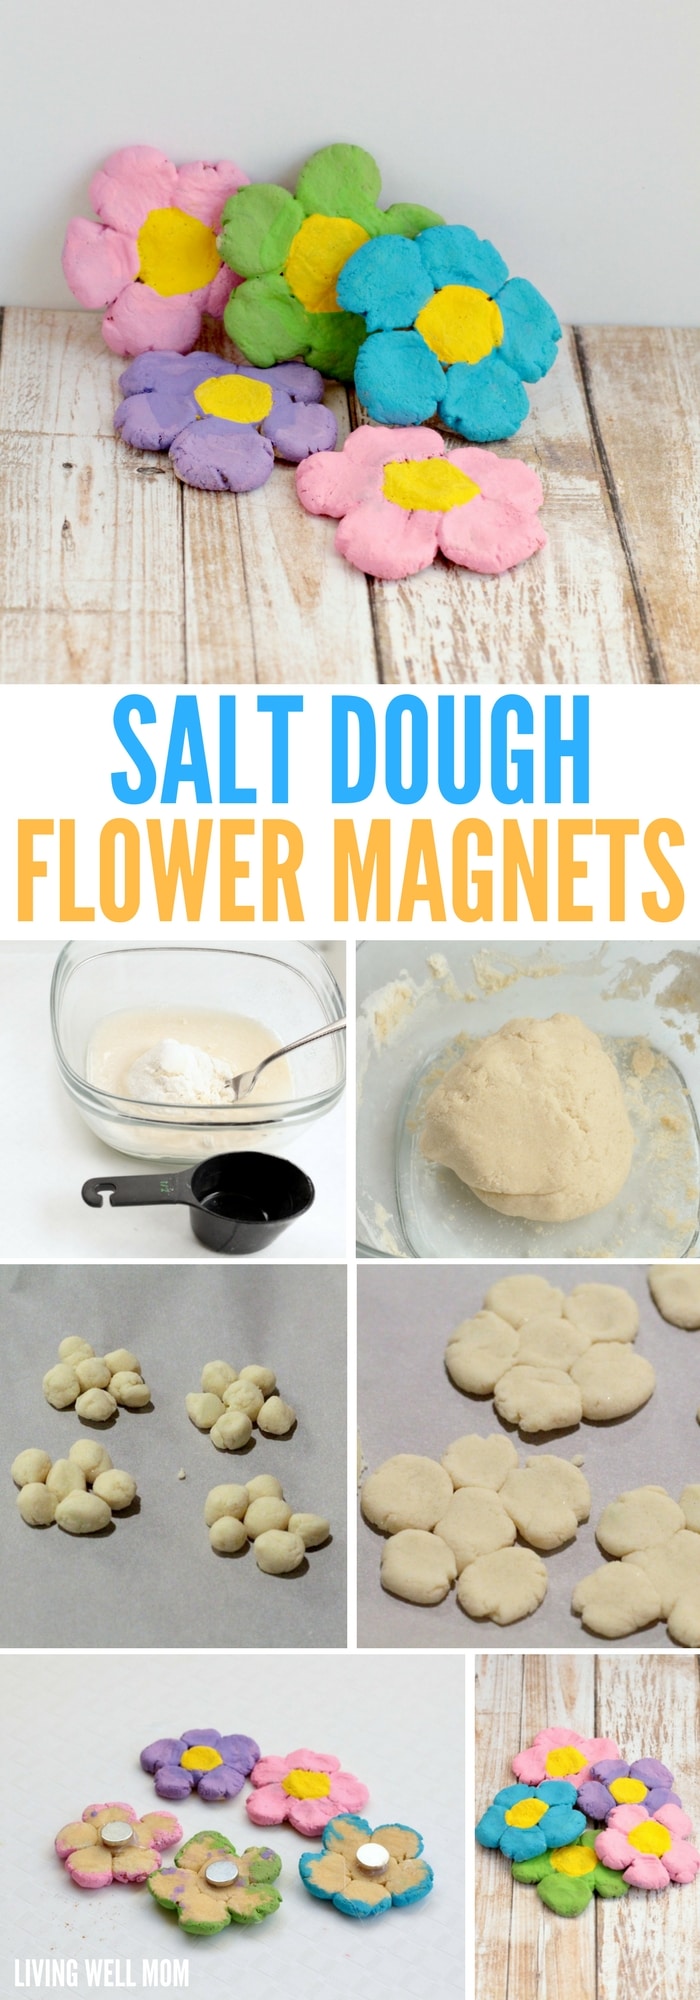 Delightful salt dough flower magnets are the perfect way to preserve your children's fingerprints in a fun, spring-themed project! Kids will love this fun activity!